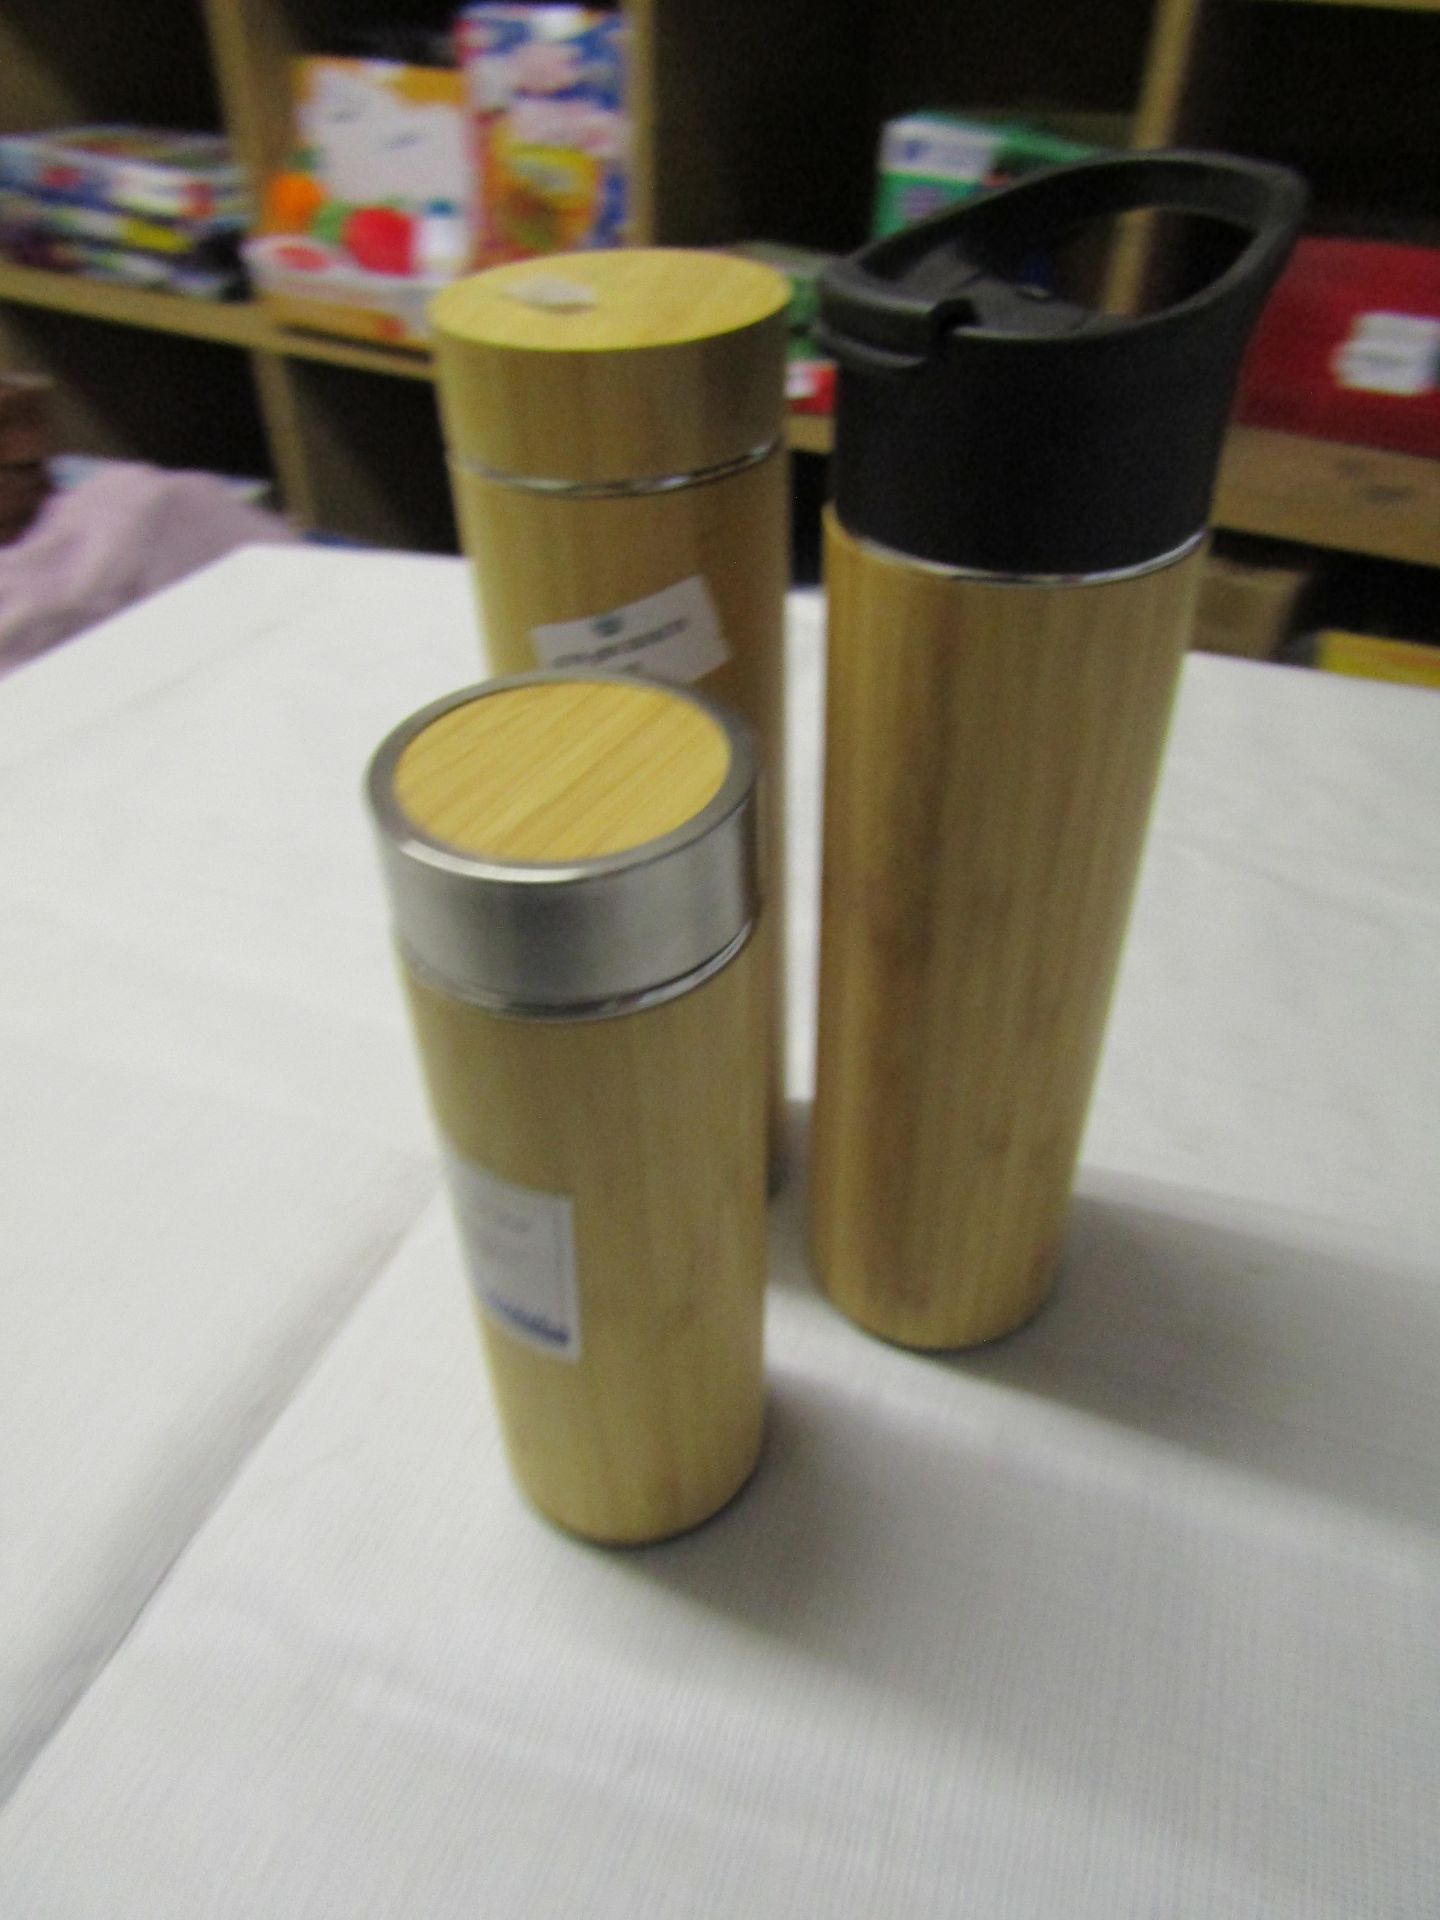 3 X Metal With Bamboo Colour Drinking Bottles All Appear Unused